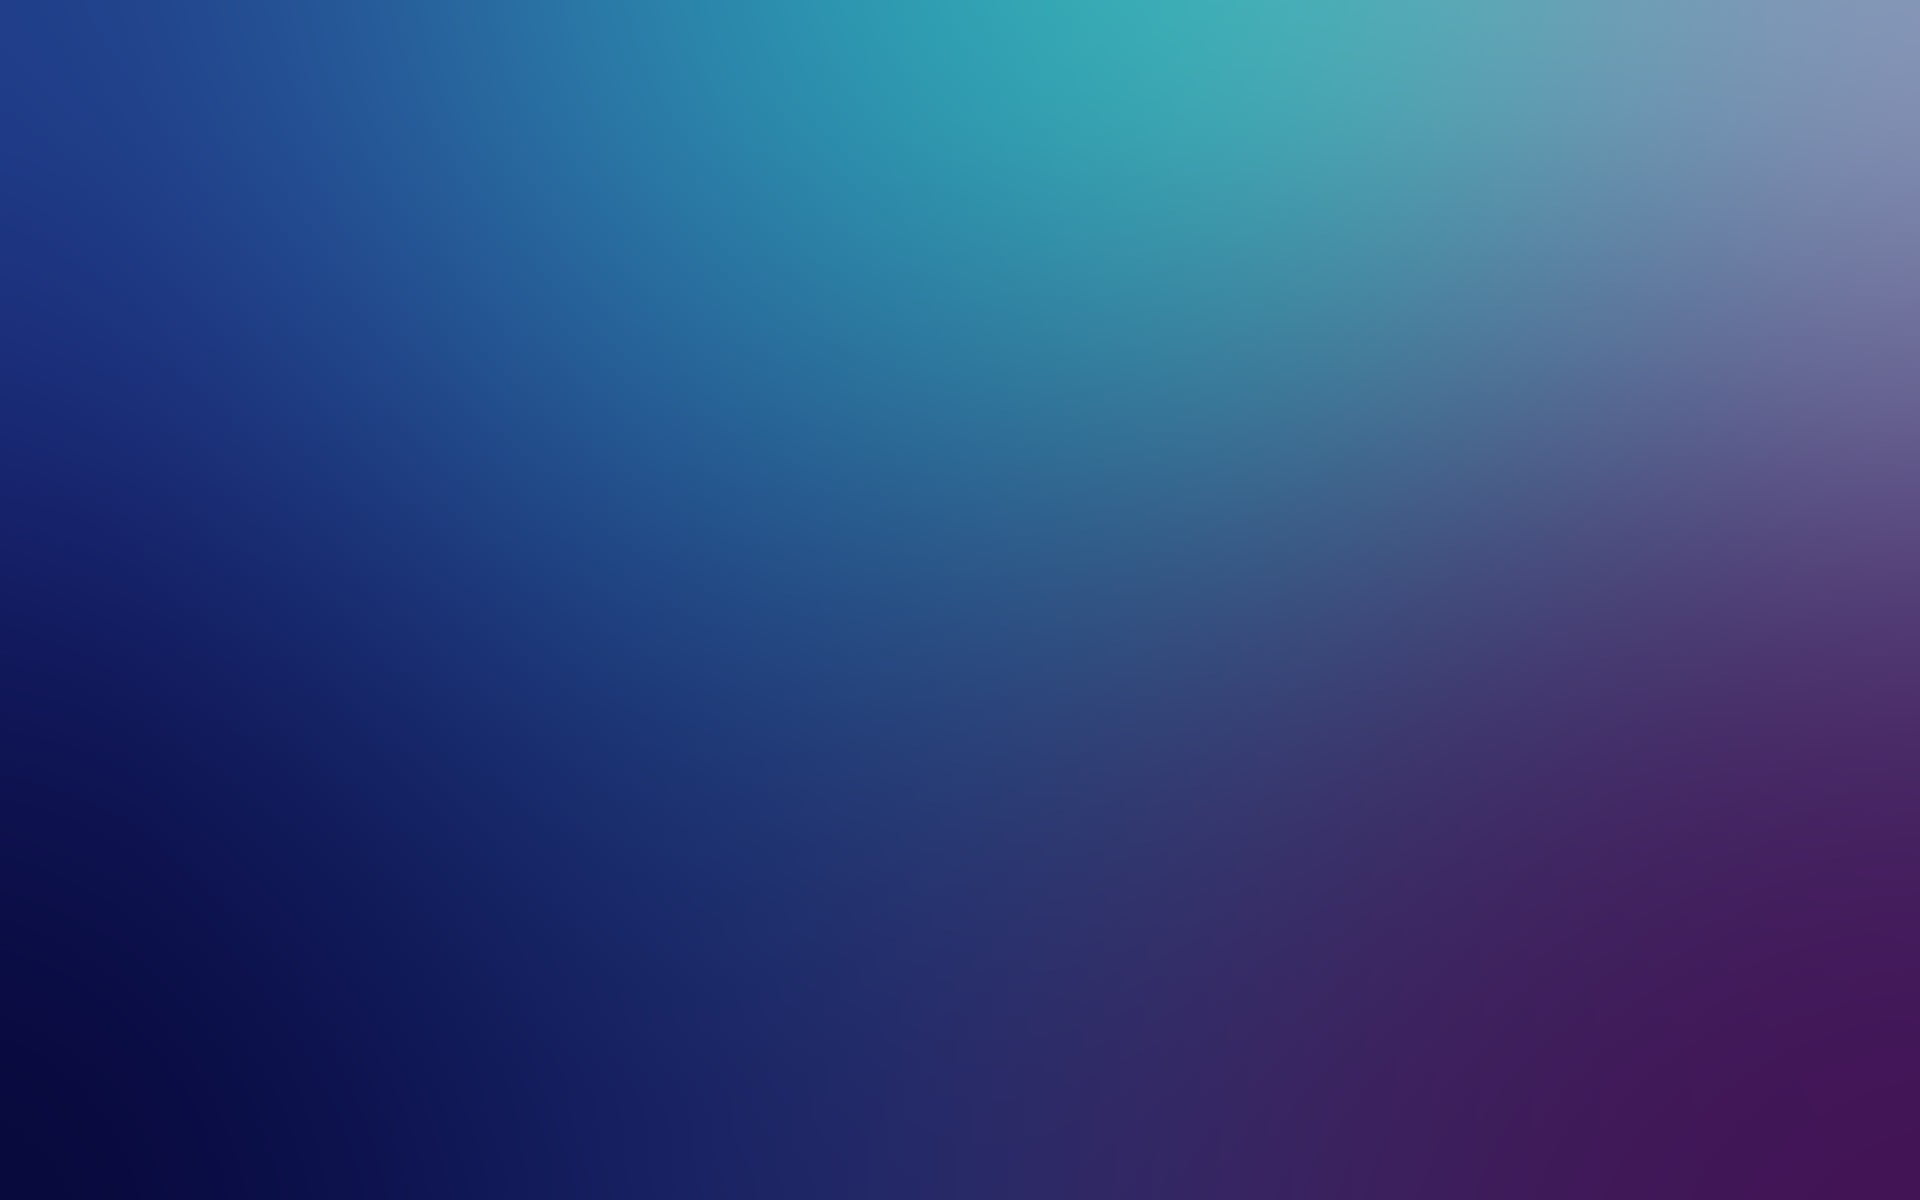 gradient, backgrounds, blue, full frame, copy space, abstract